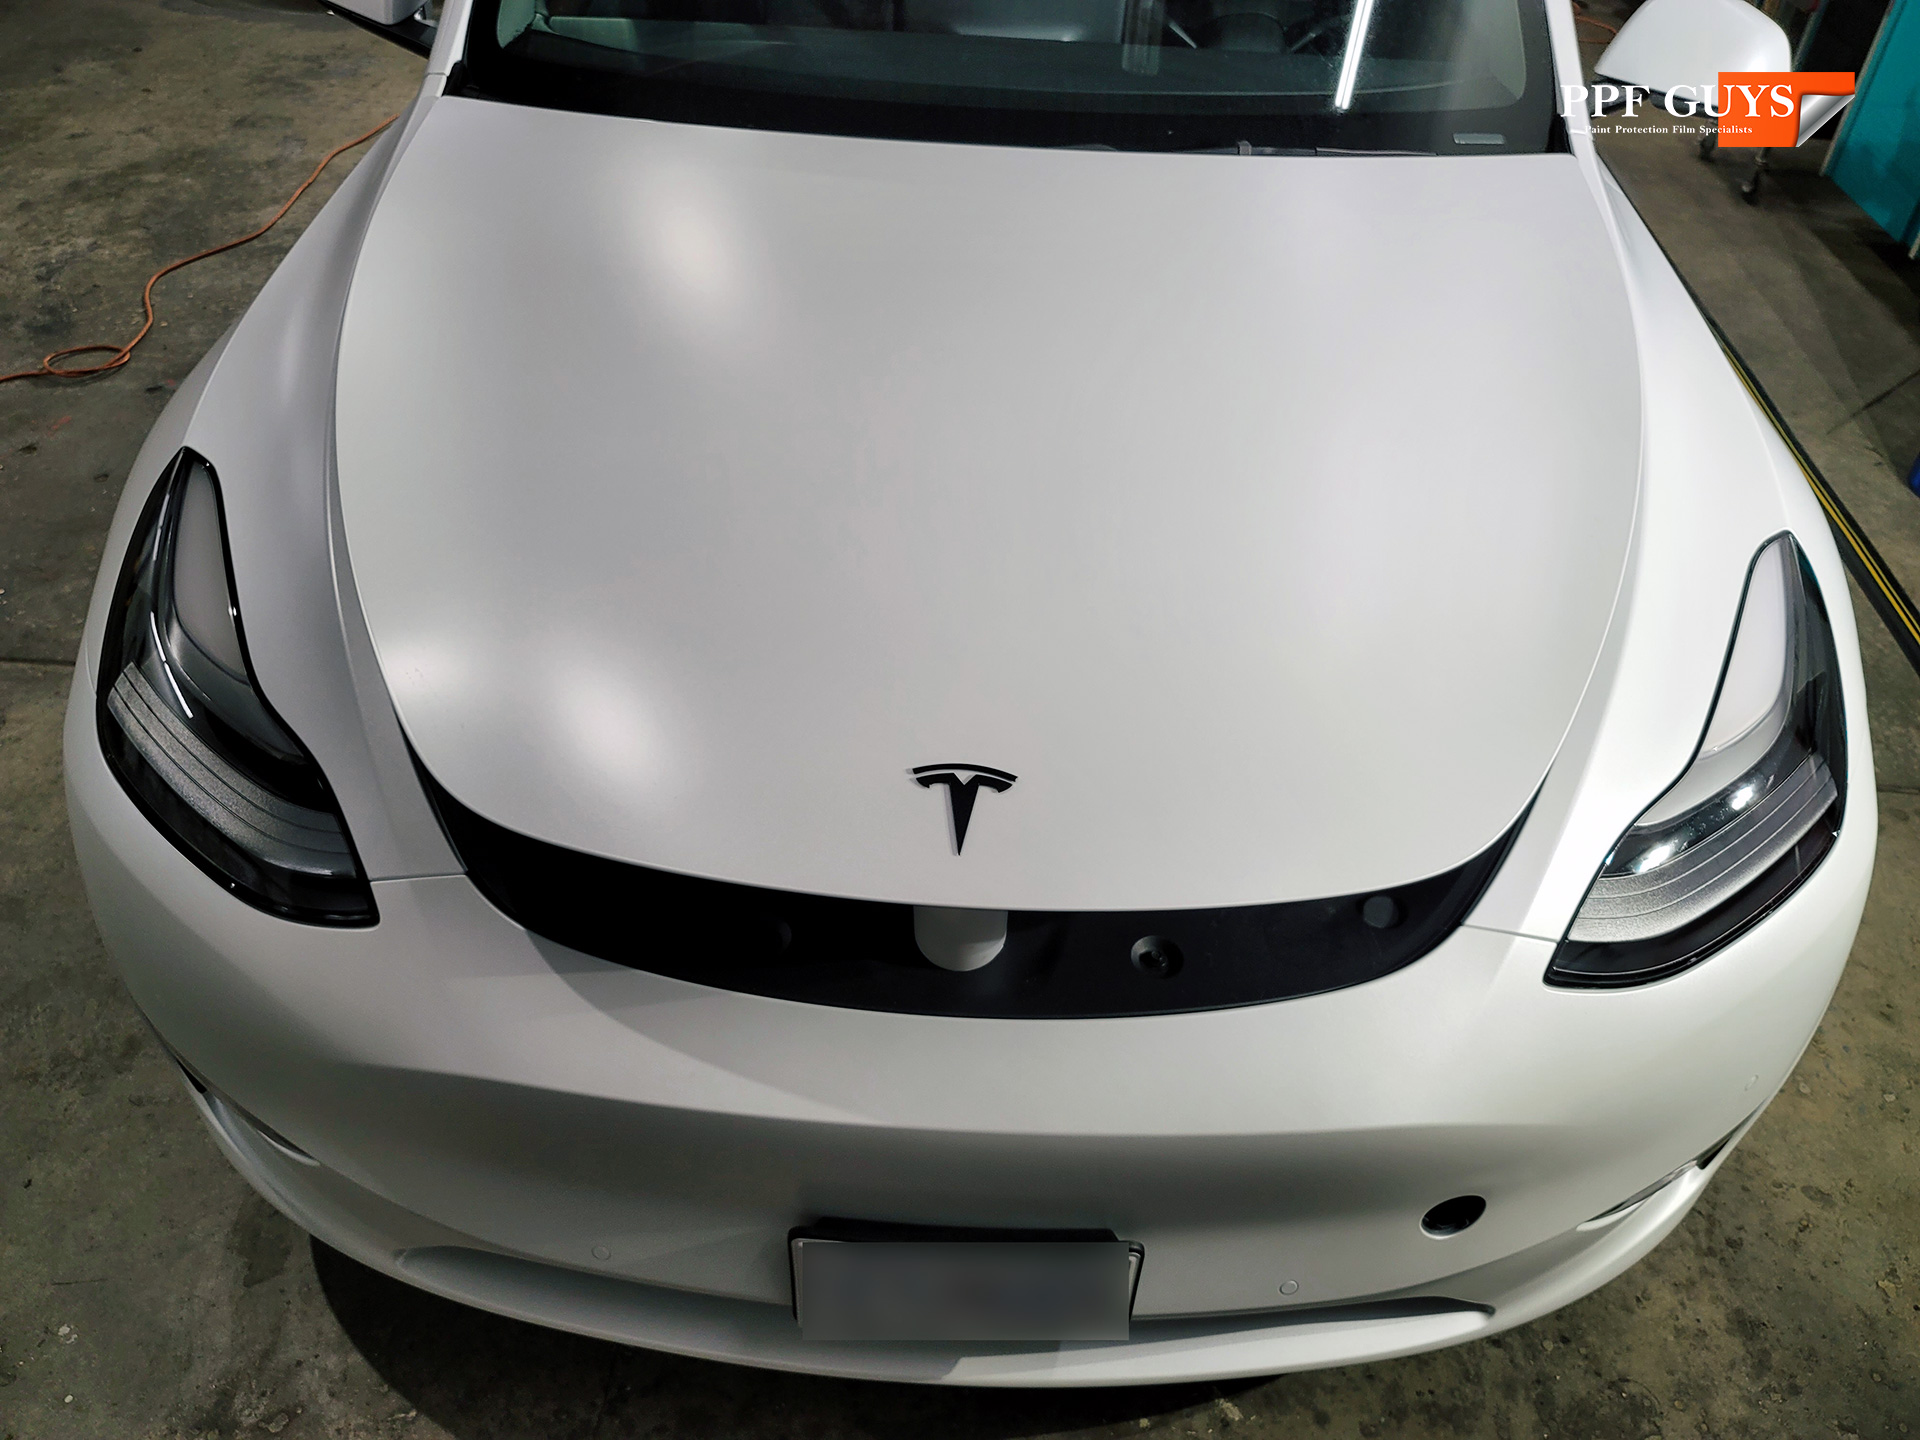 PPF Guys Model Y White Xpel Stealth, ceramic, painted emblems (29).jpg